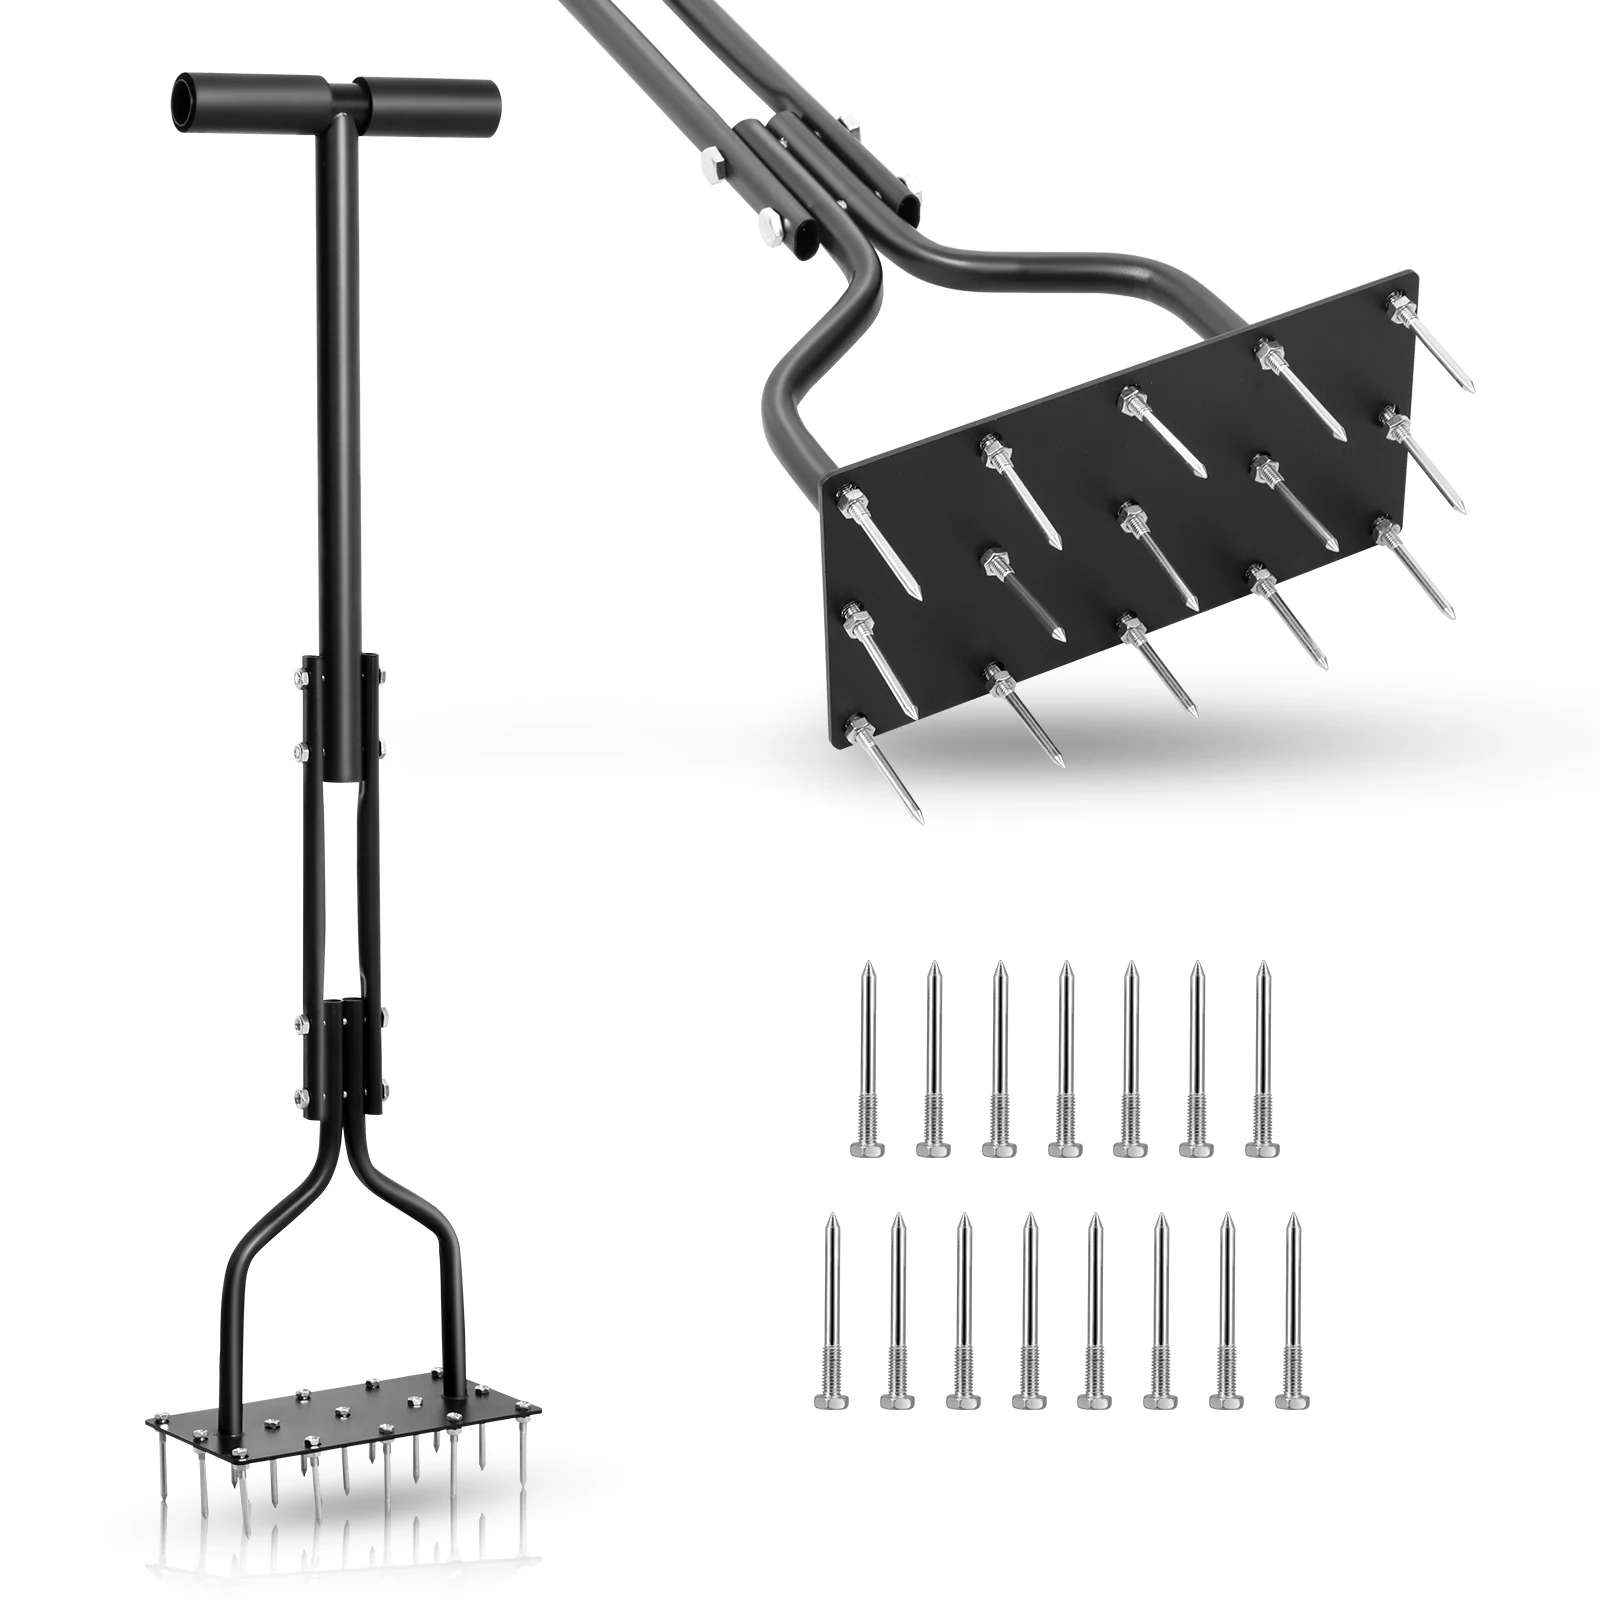 

Lawn Aerator Spike Manual Tool Solid Steel Spikes Garden Grass Aeration and Soil Aerating Tool 36 inch Clean Tool